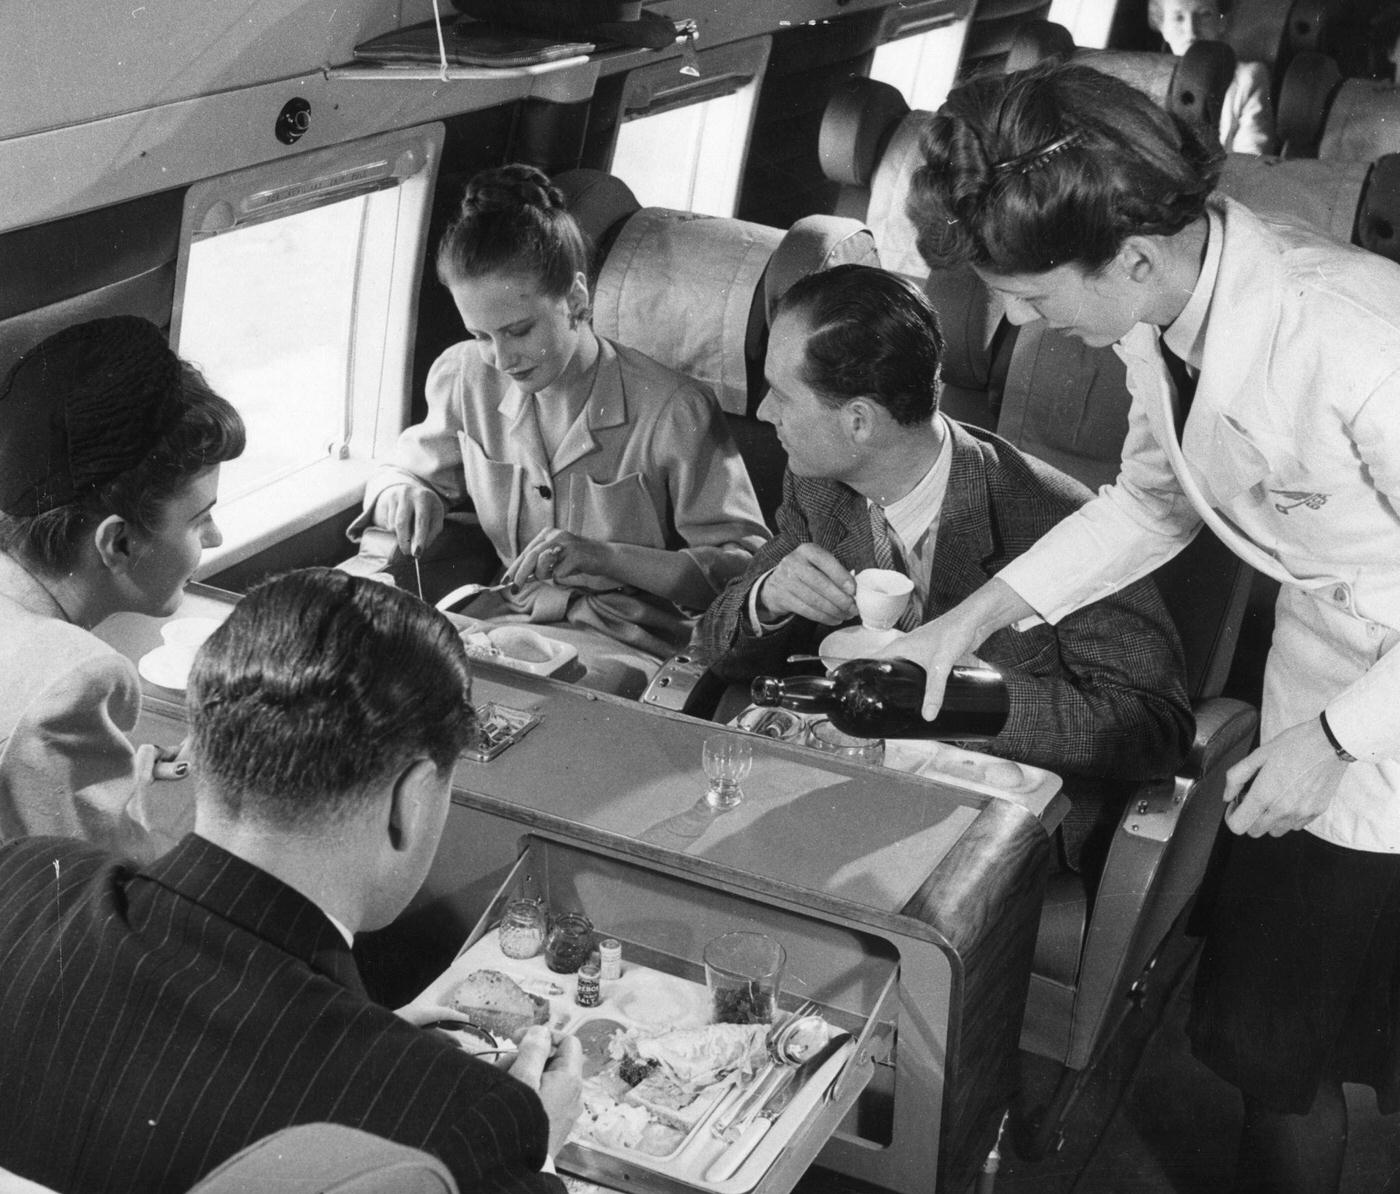 A stewardess serves drinks while passengers have lunch aboard a BEA Vickers Viking passenger plane in 1958.